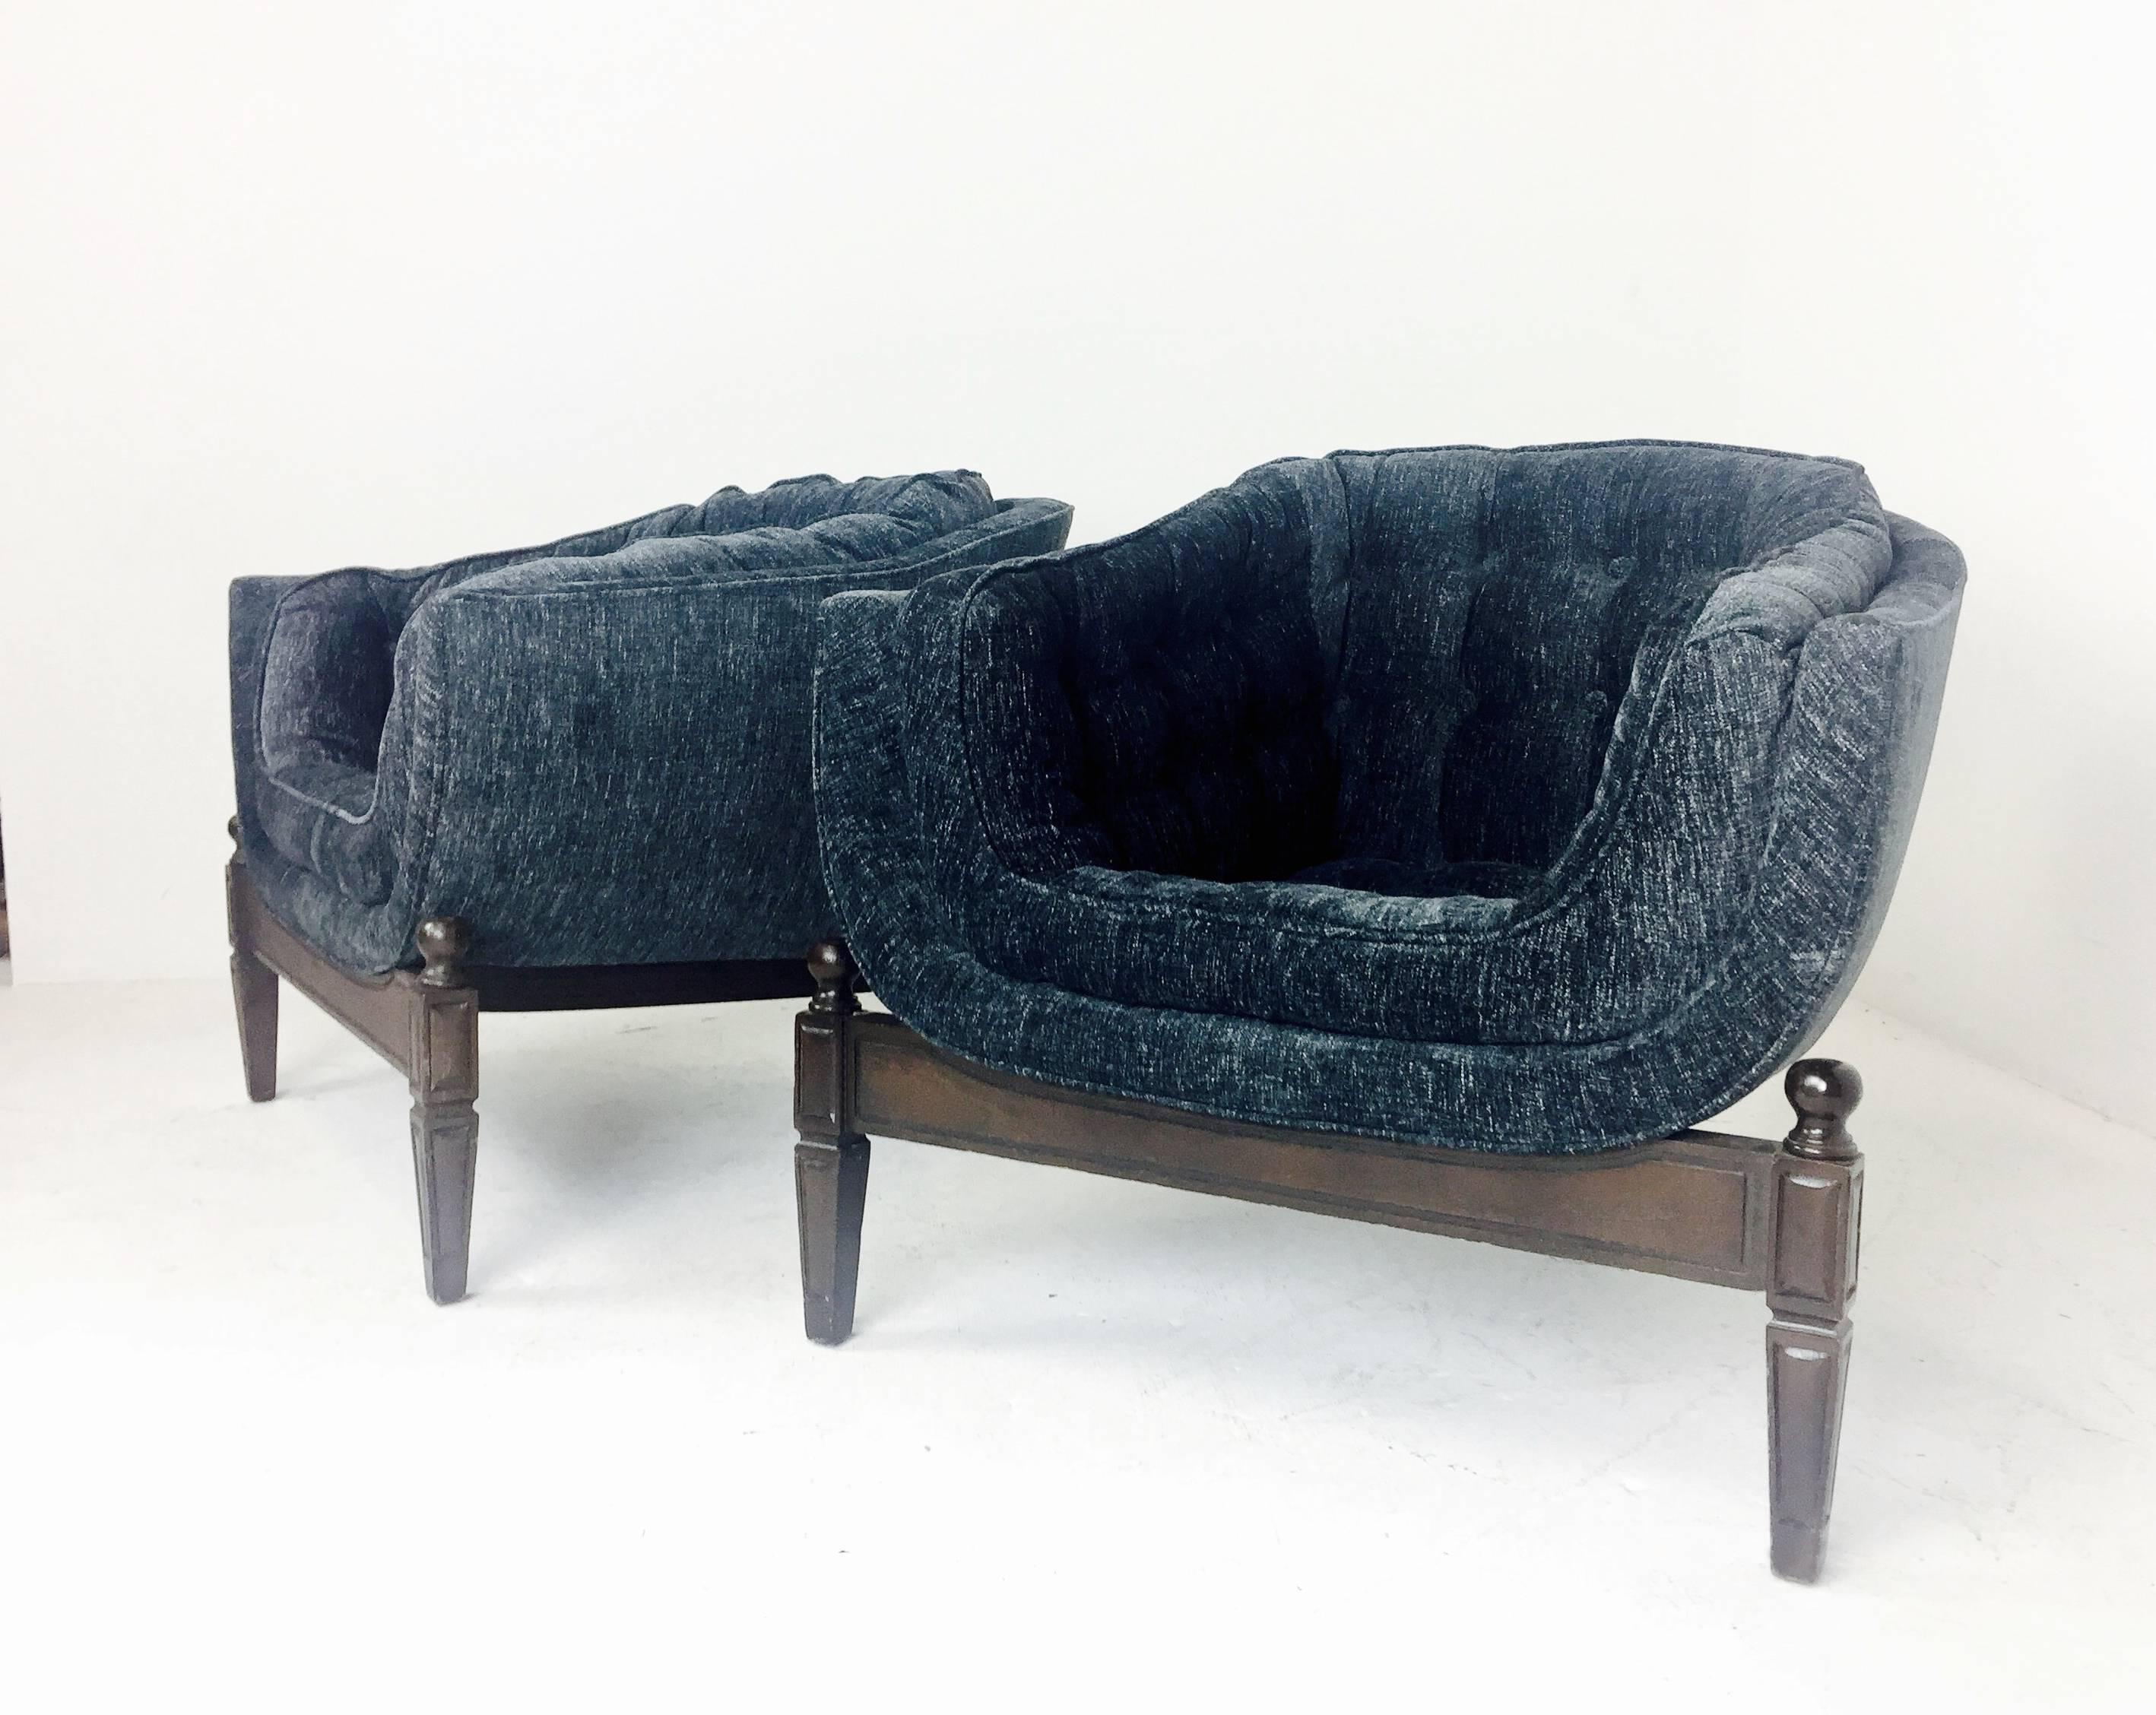 20th Century Pair of Low Tufted Three Legged Lounge Chairs in the Style of Adrain Pearsall